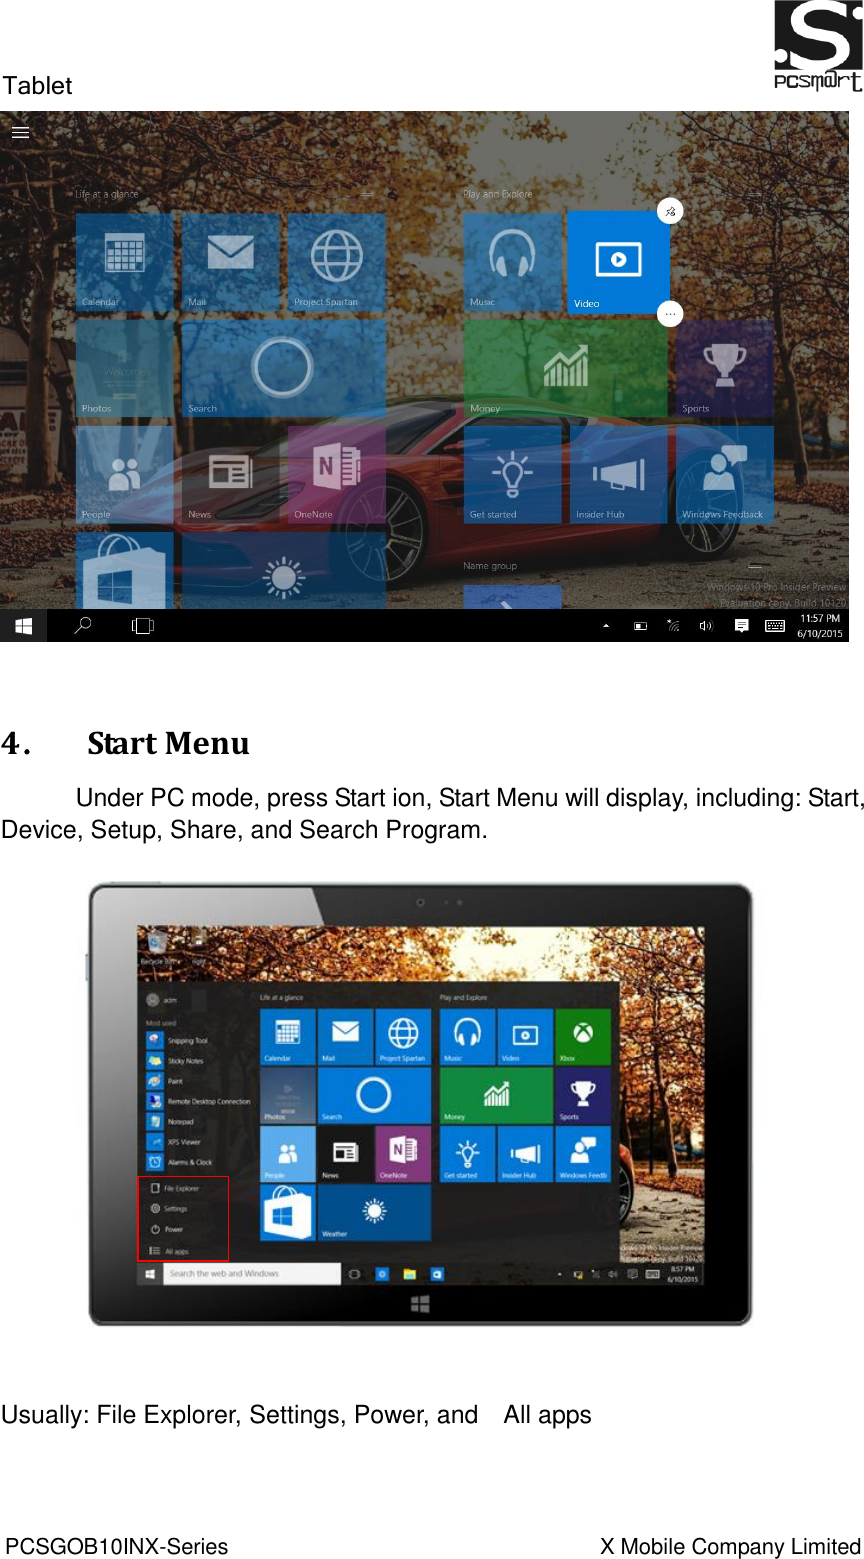 Tablet                                                           PCSGOB10INX-Series                                                                  X Mobile Company Limited                             4．  Start Menu         Under PC mode, press Start ion, Start Menu will display, including: Start, Device, Setup, Share, and Search Program.      Usually: File Explorer, Settings, Power, and    All apps    